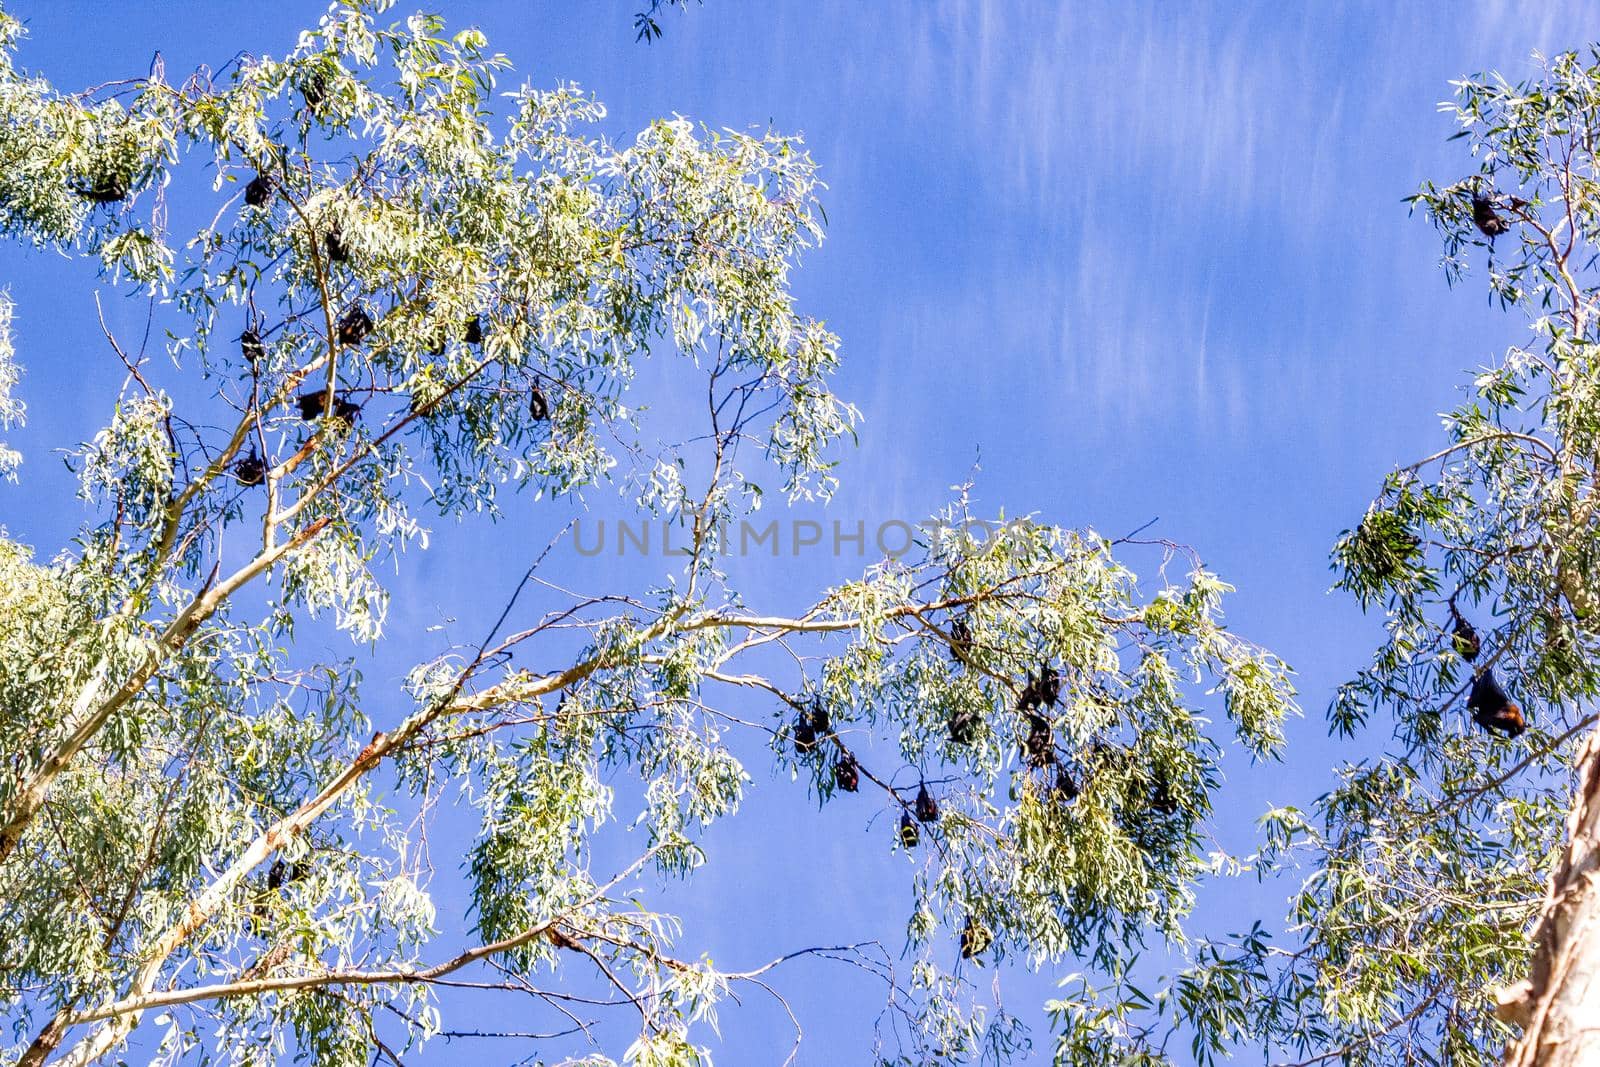 Black bats hanging upside down in trees in the Karijini National Park, Western Australia by bettercallcurry